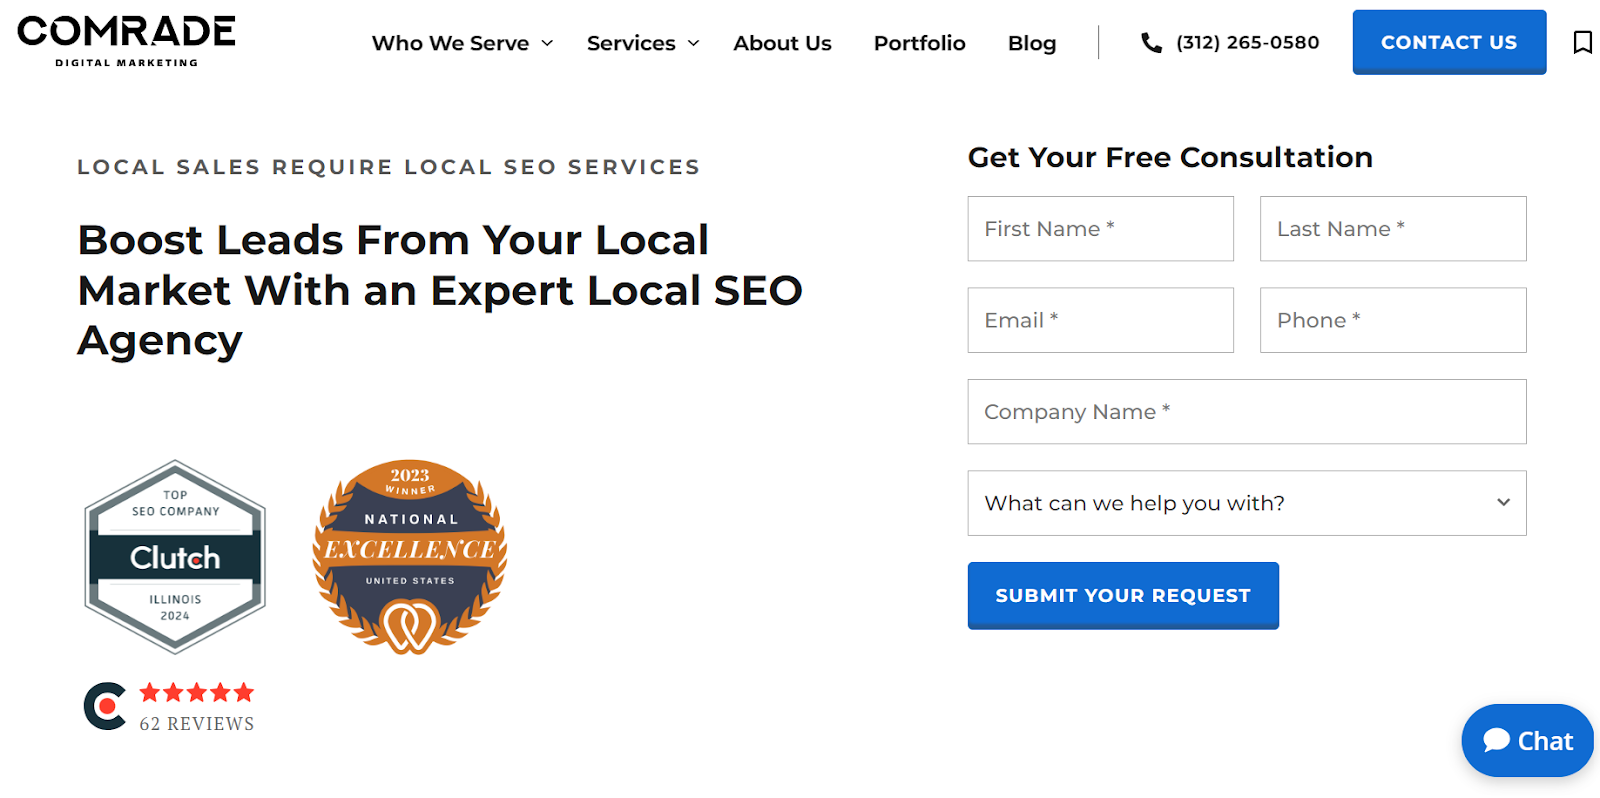 Comrade Digital Marketing Agency listed as one of the best SEO companies for Roofers